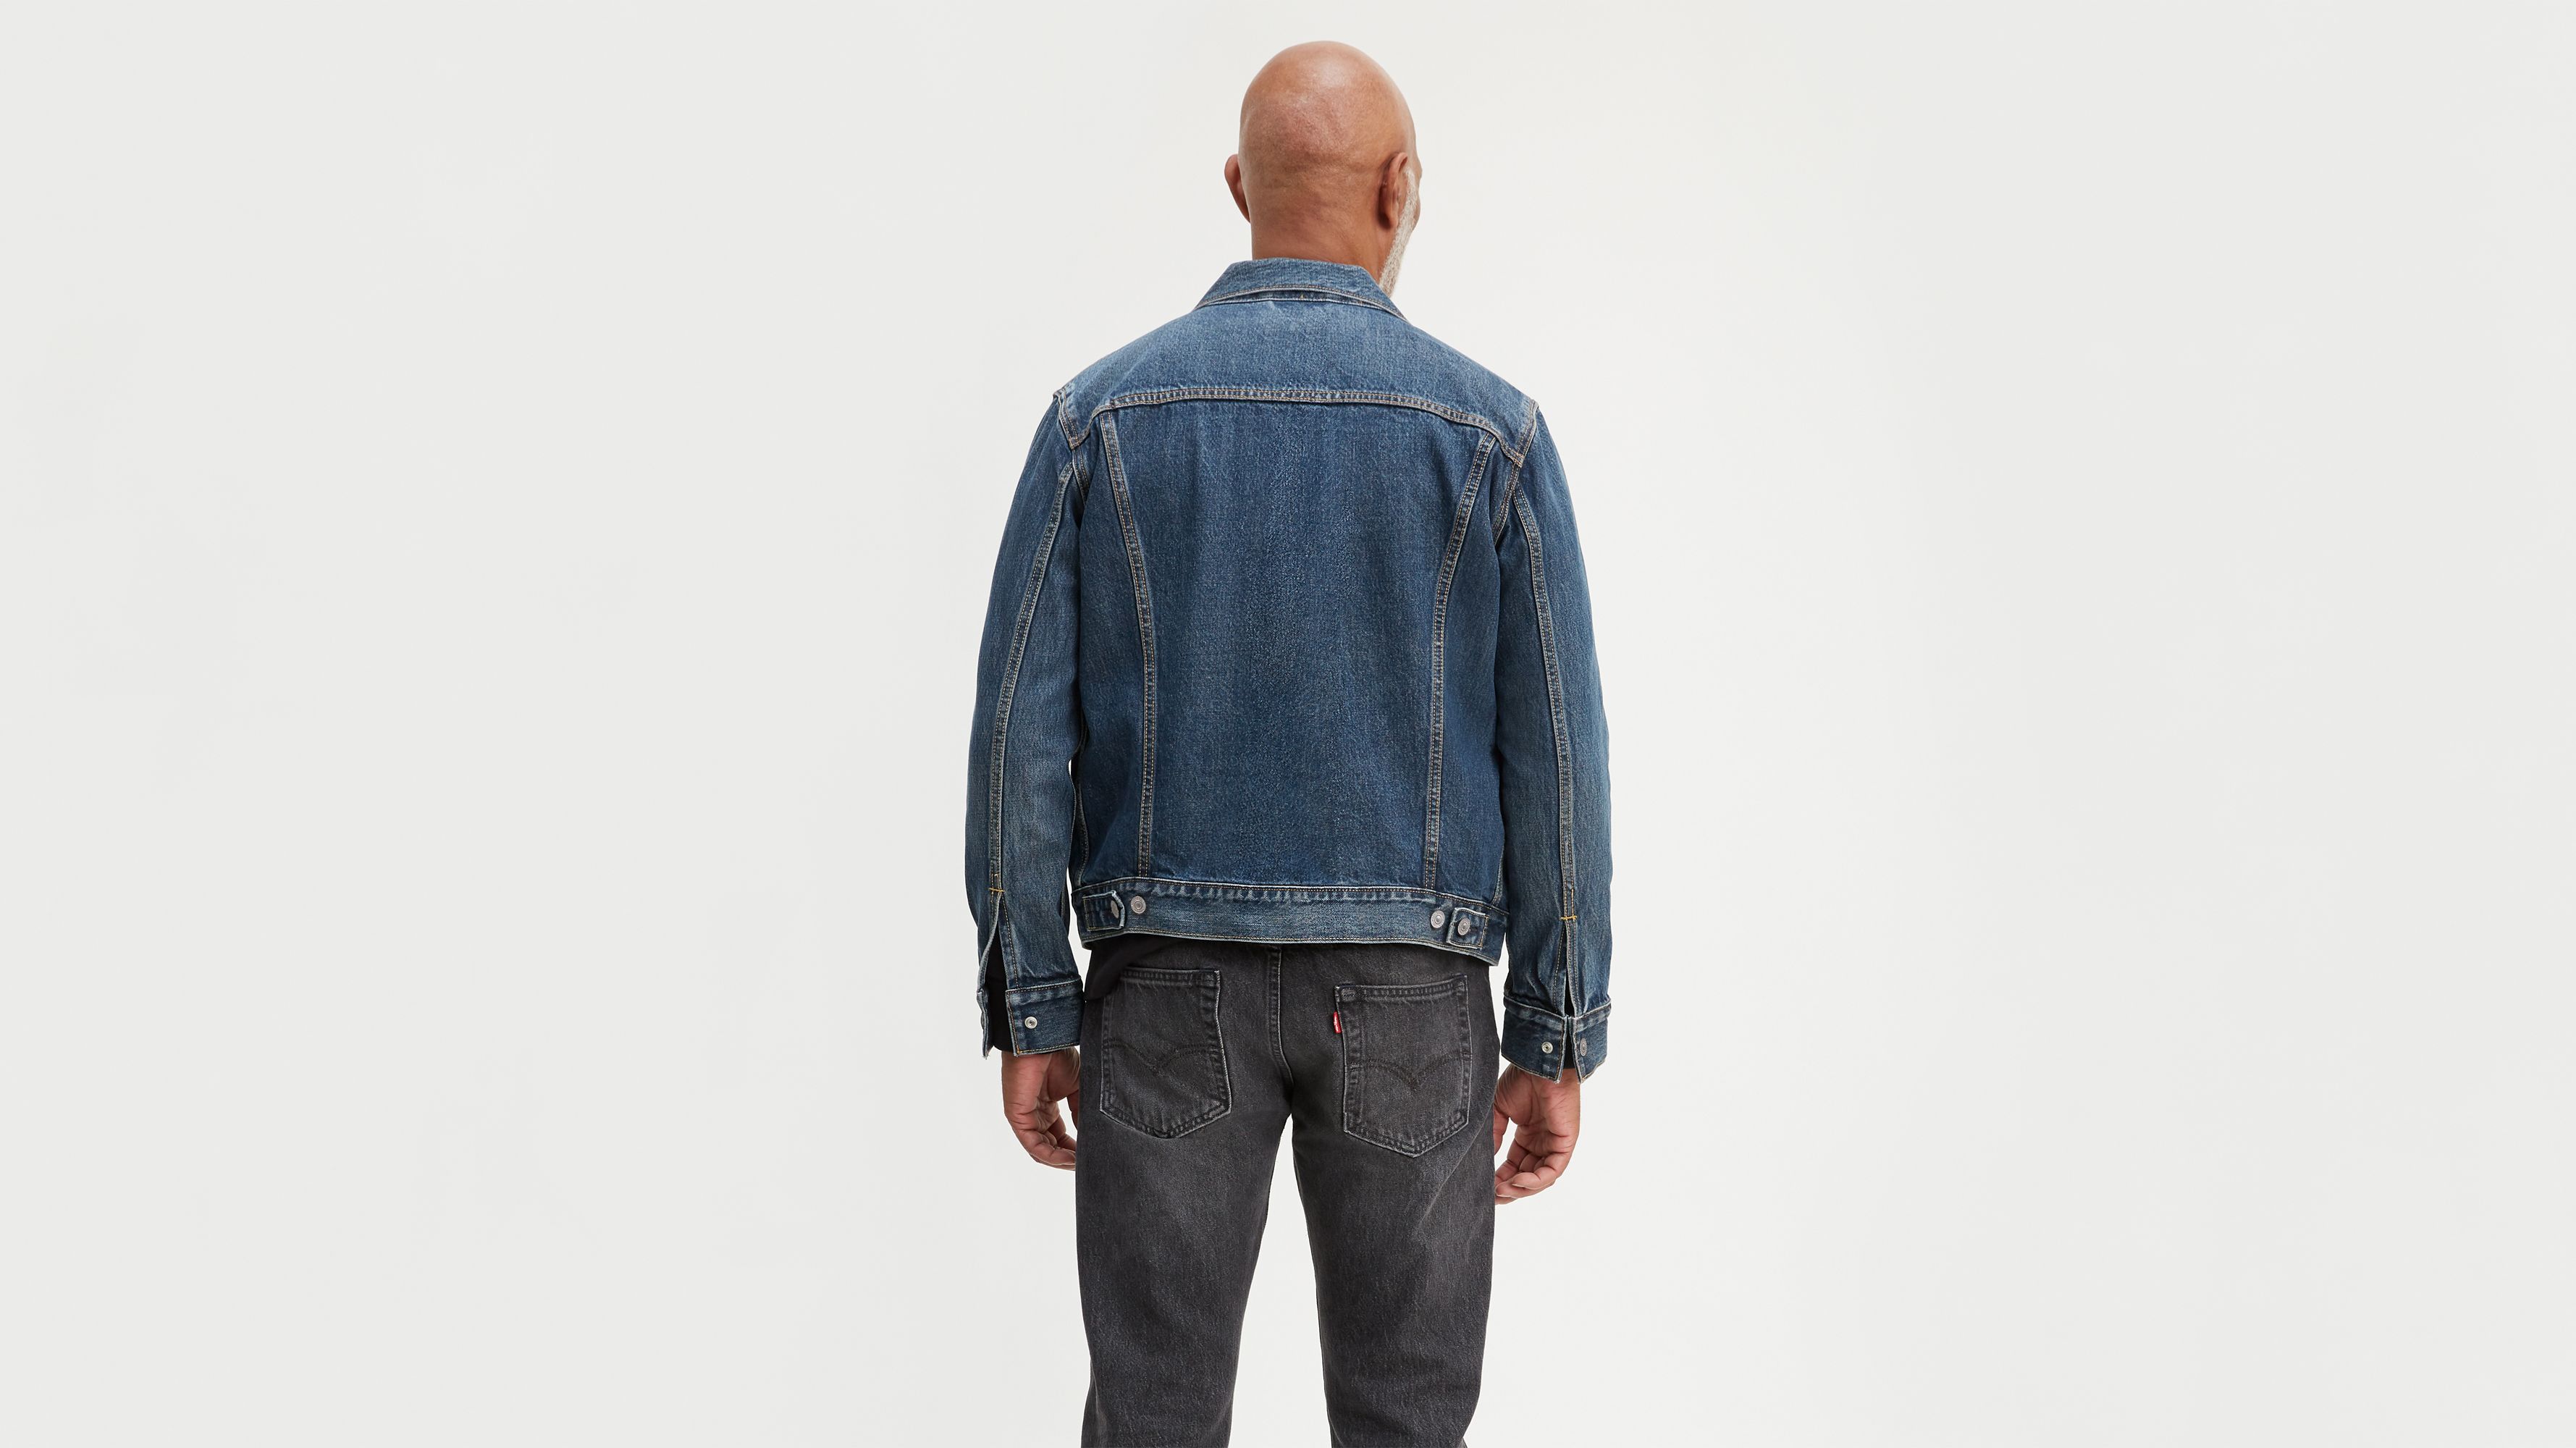 levis connected jacket